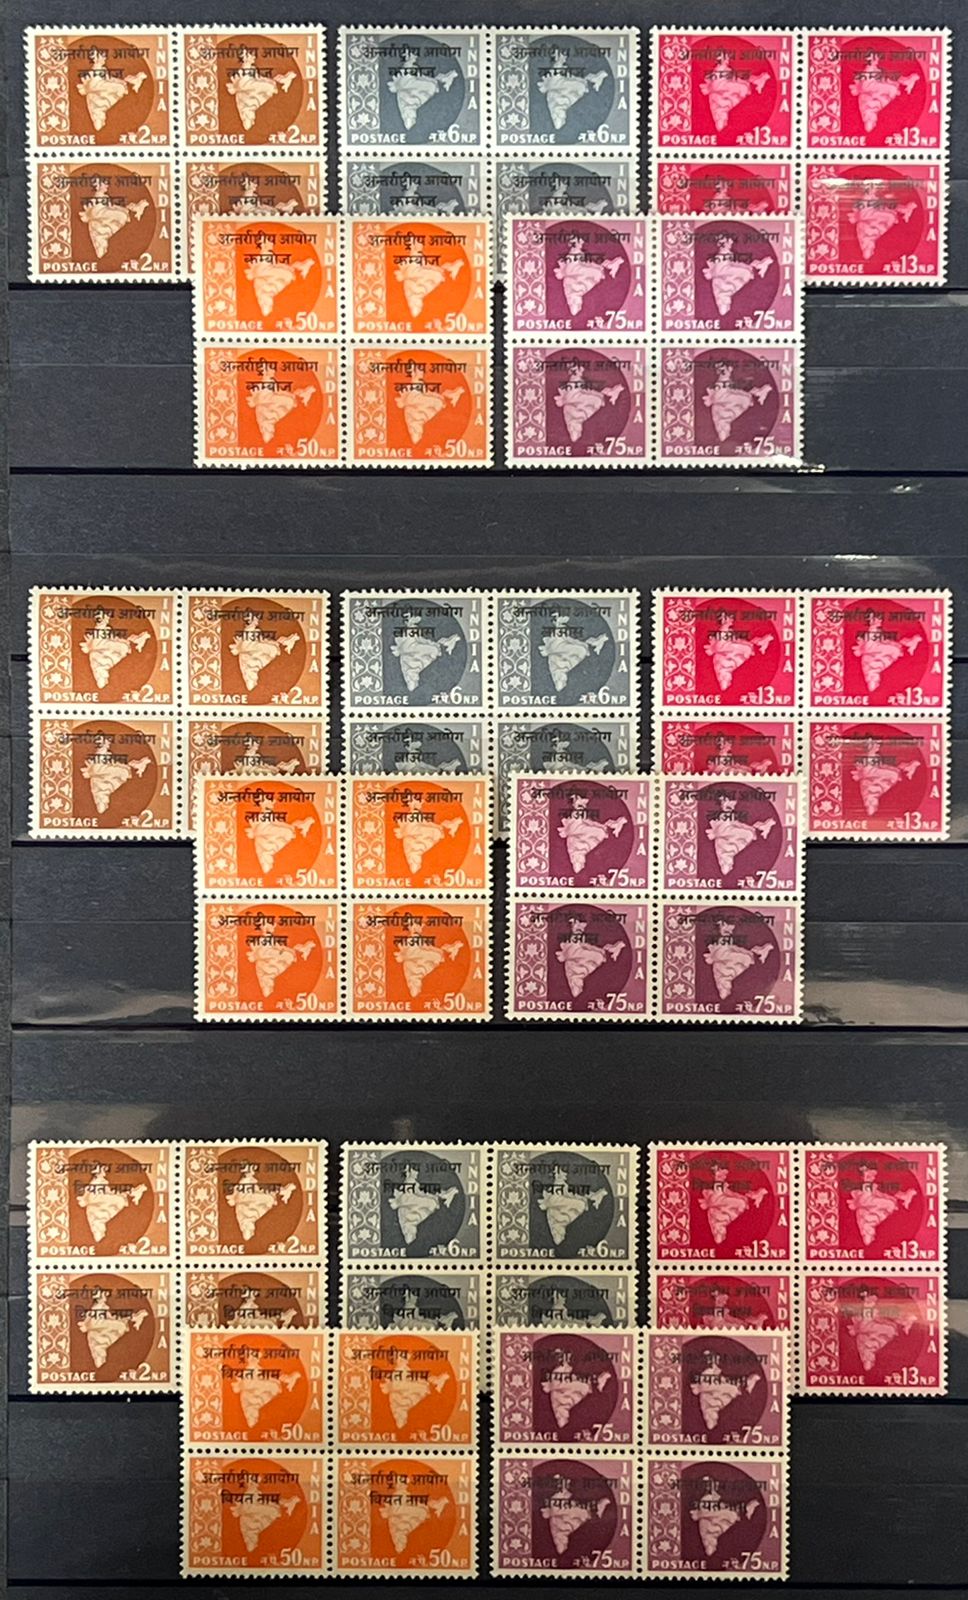 India 1957 Star Watermark Map Stamps Overprinted for Use in Laos Vietnam Cambodia Complete Set in Blocks MNH